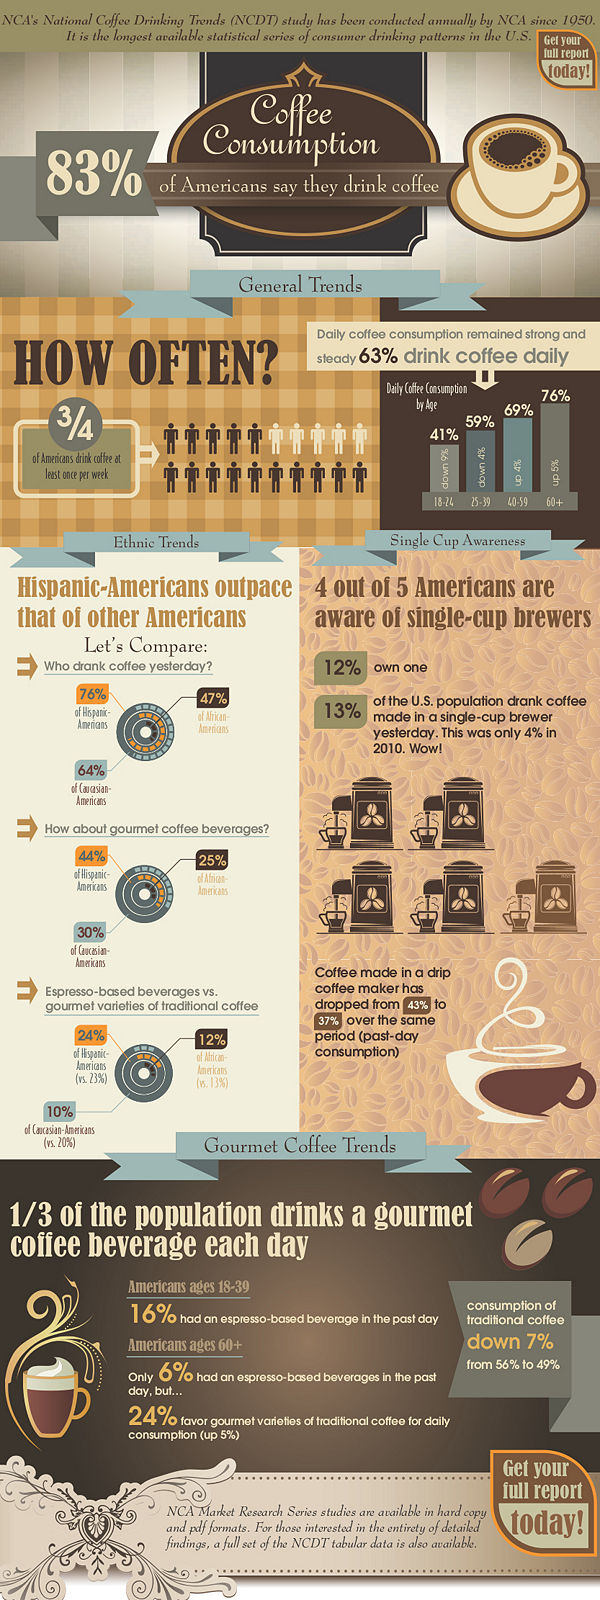 Figure: Some Stats about Coffee Consumption <http://www.ncausa.org/i4a/pages/index.cfm?pageid=767>